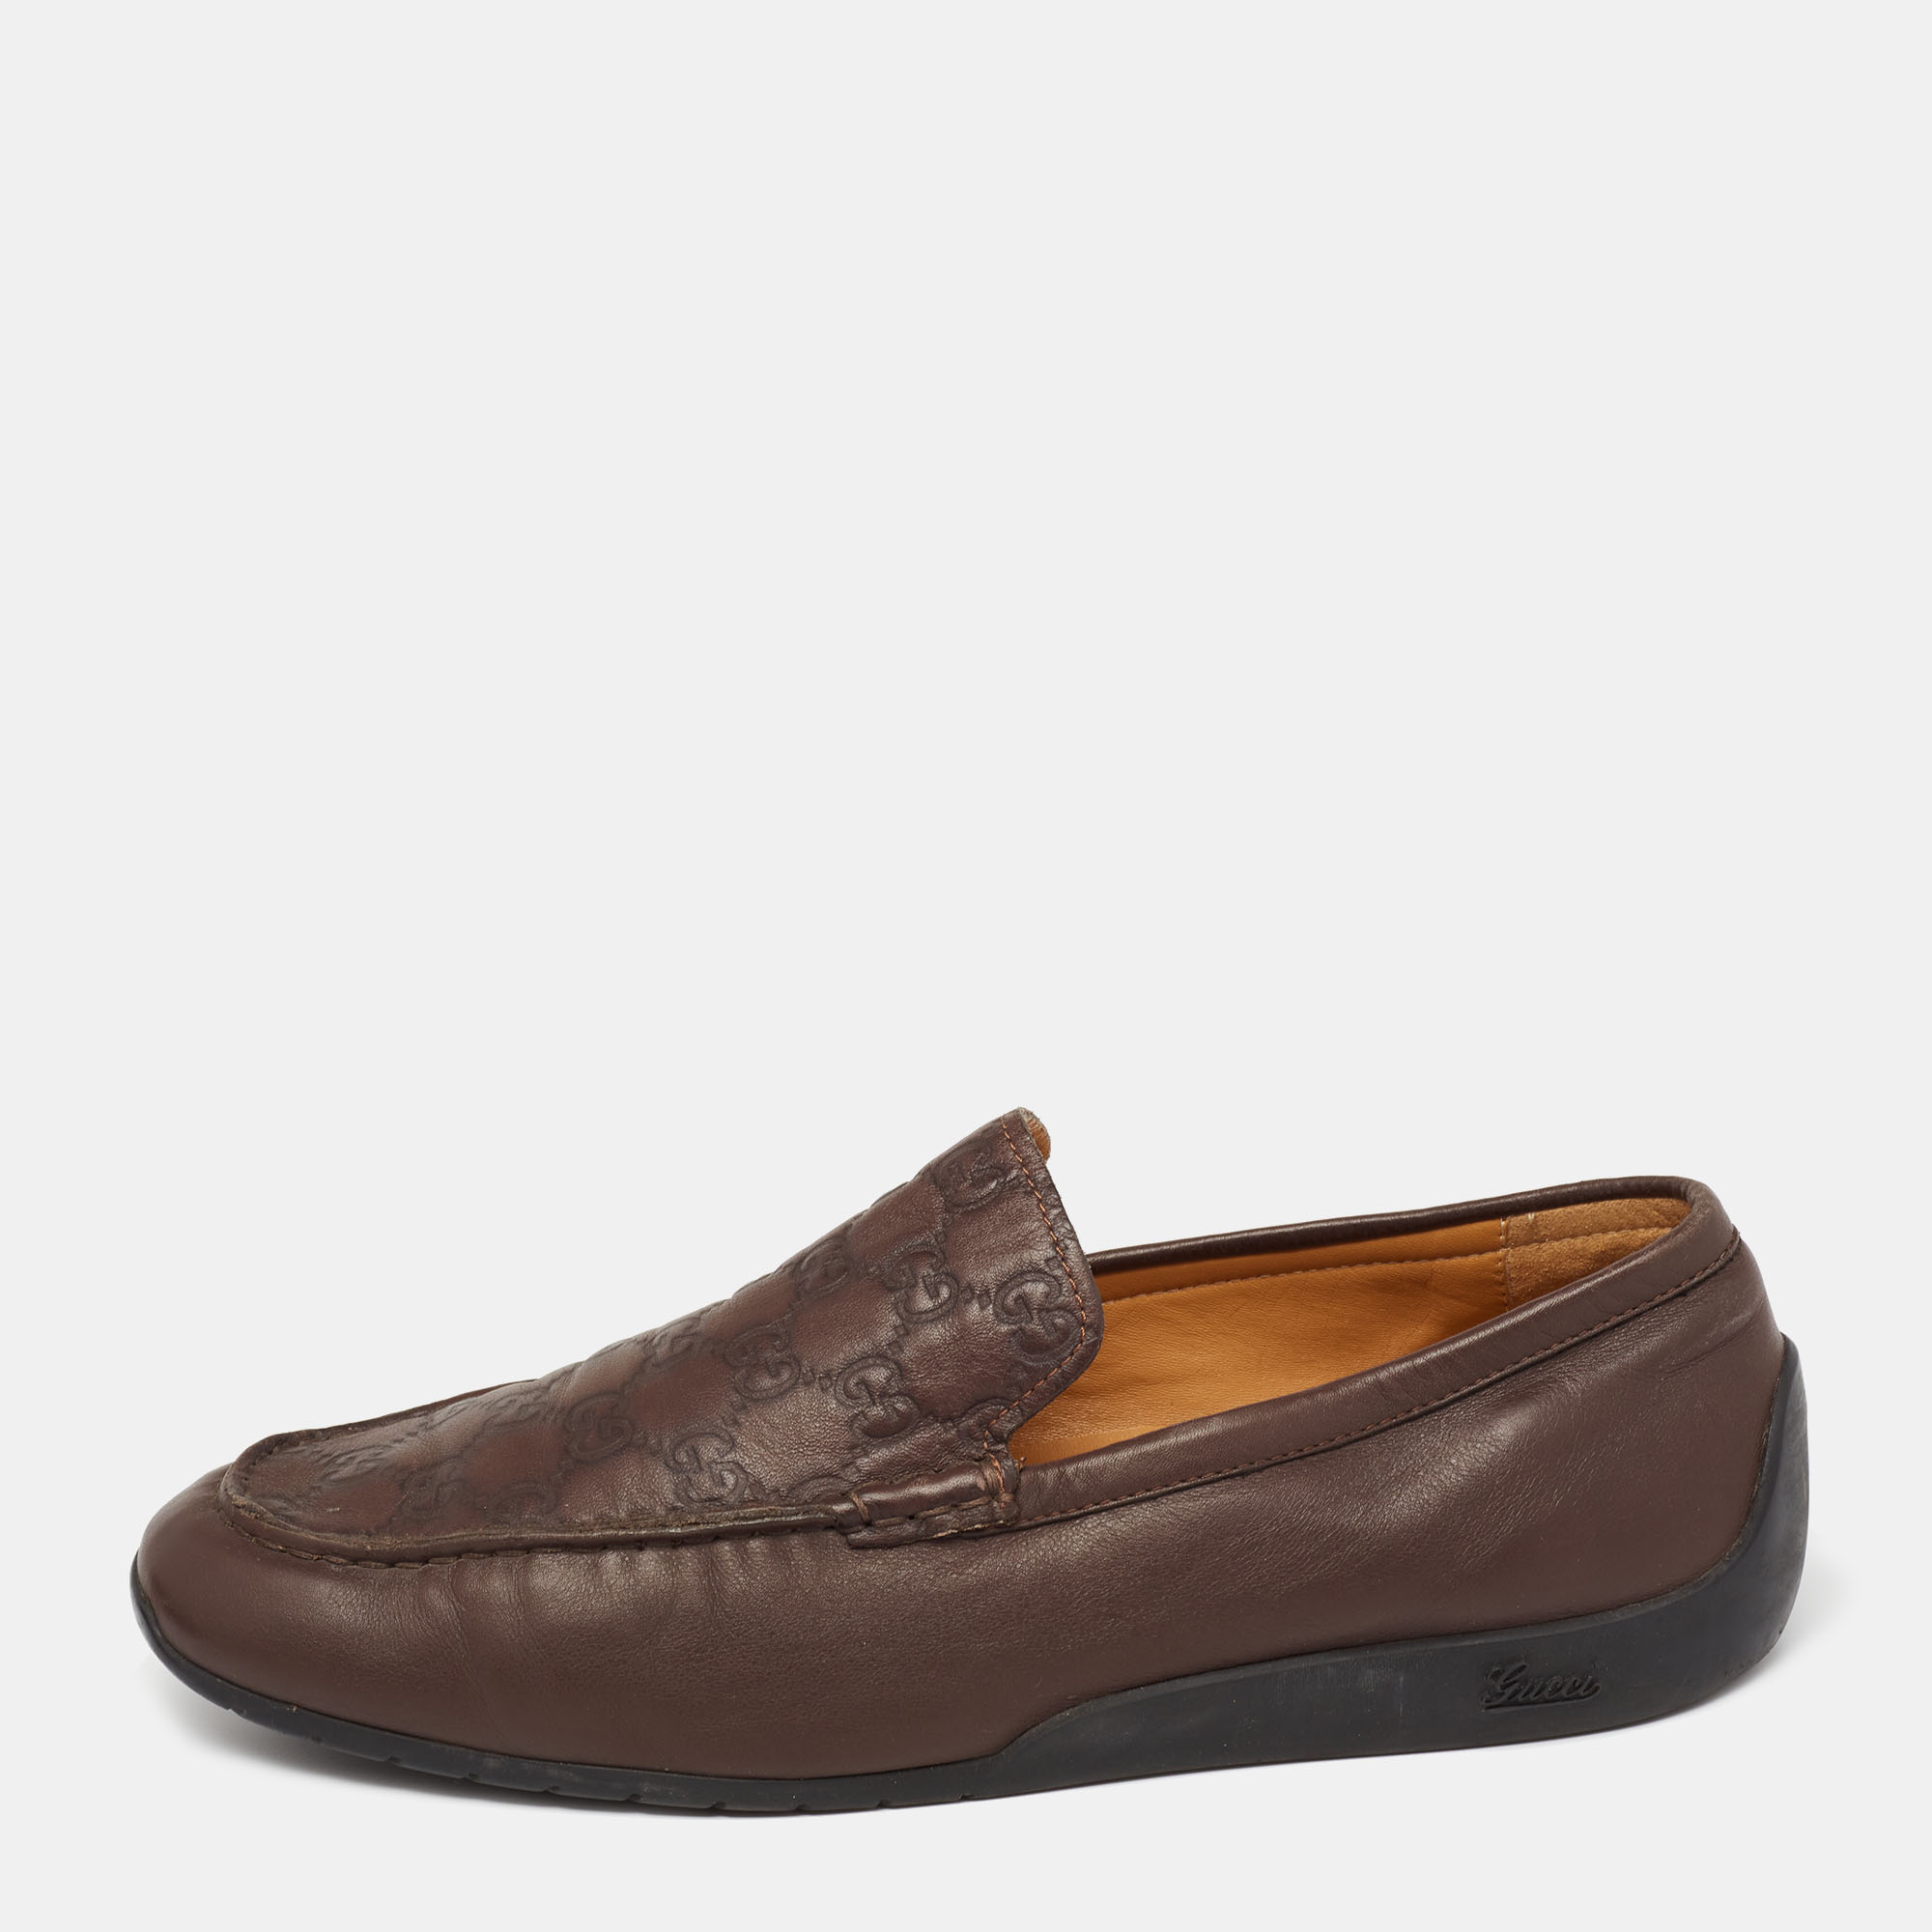 Gucci Brown Guccissima Leather GG Slip On Loafers Size 43.5